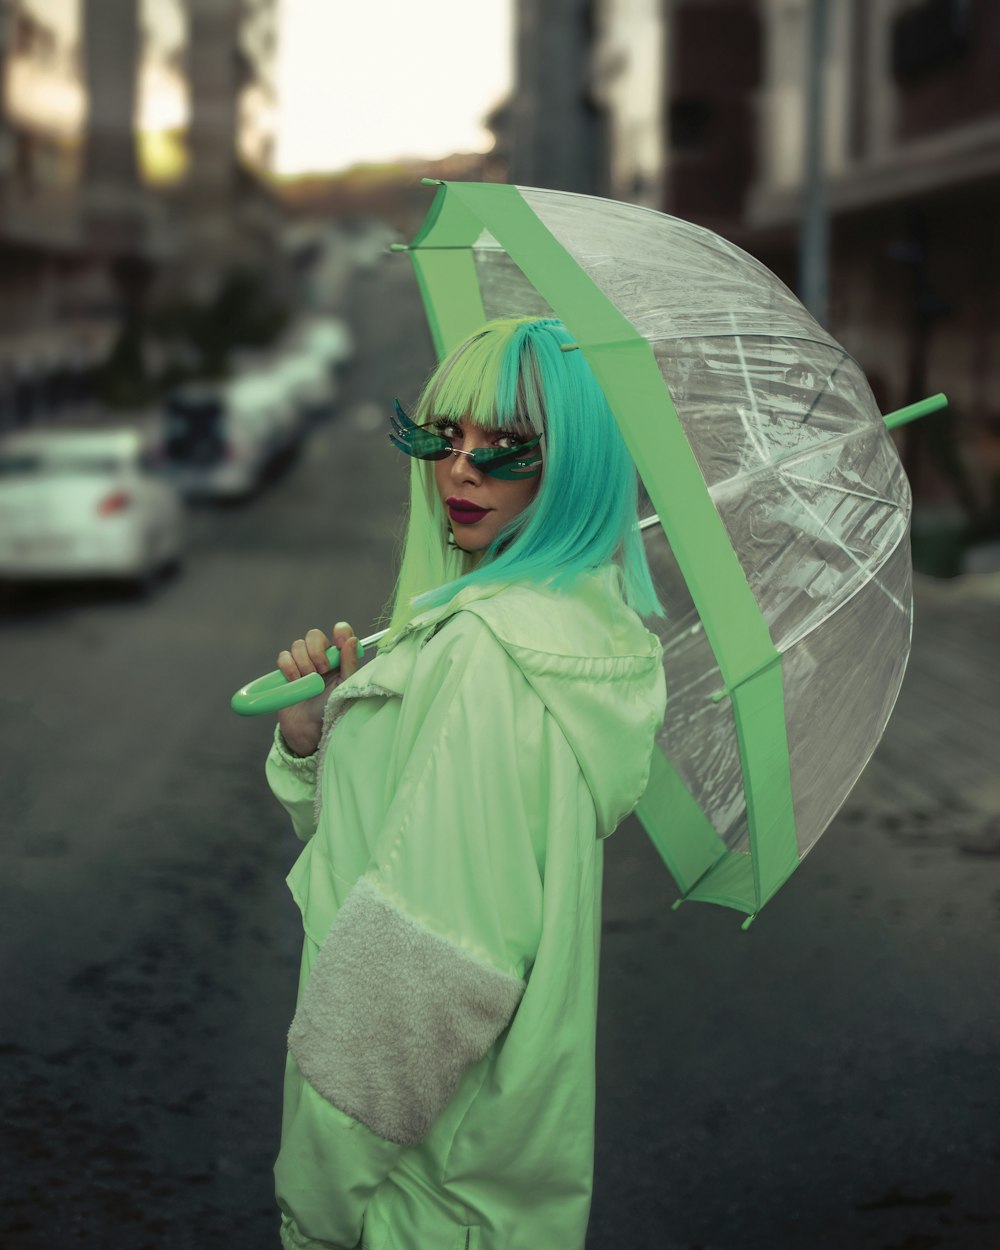 a woman in a green outfit holding an umbrella